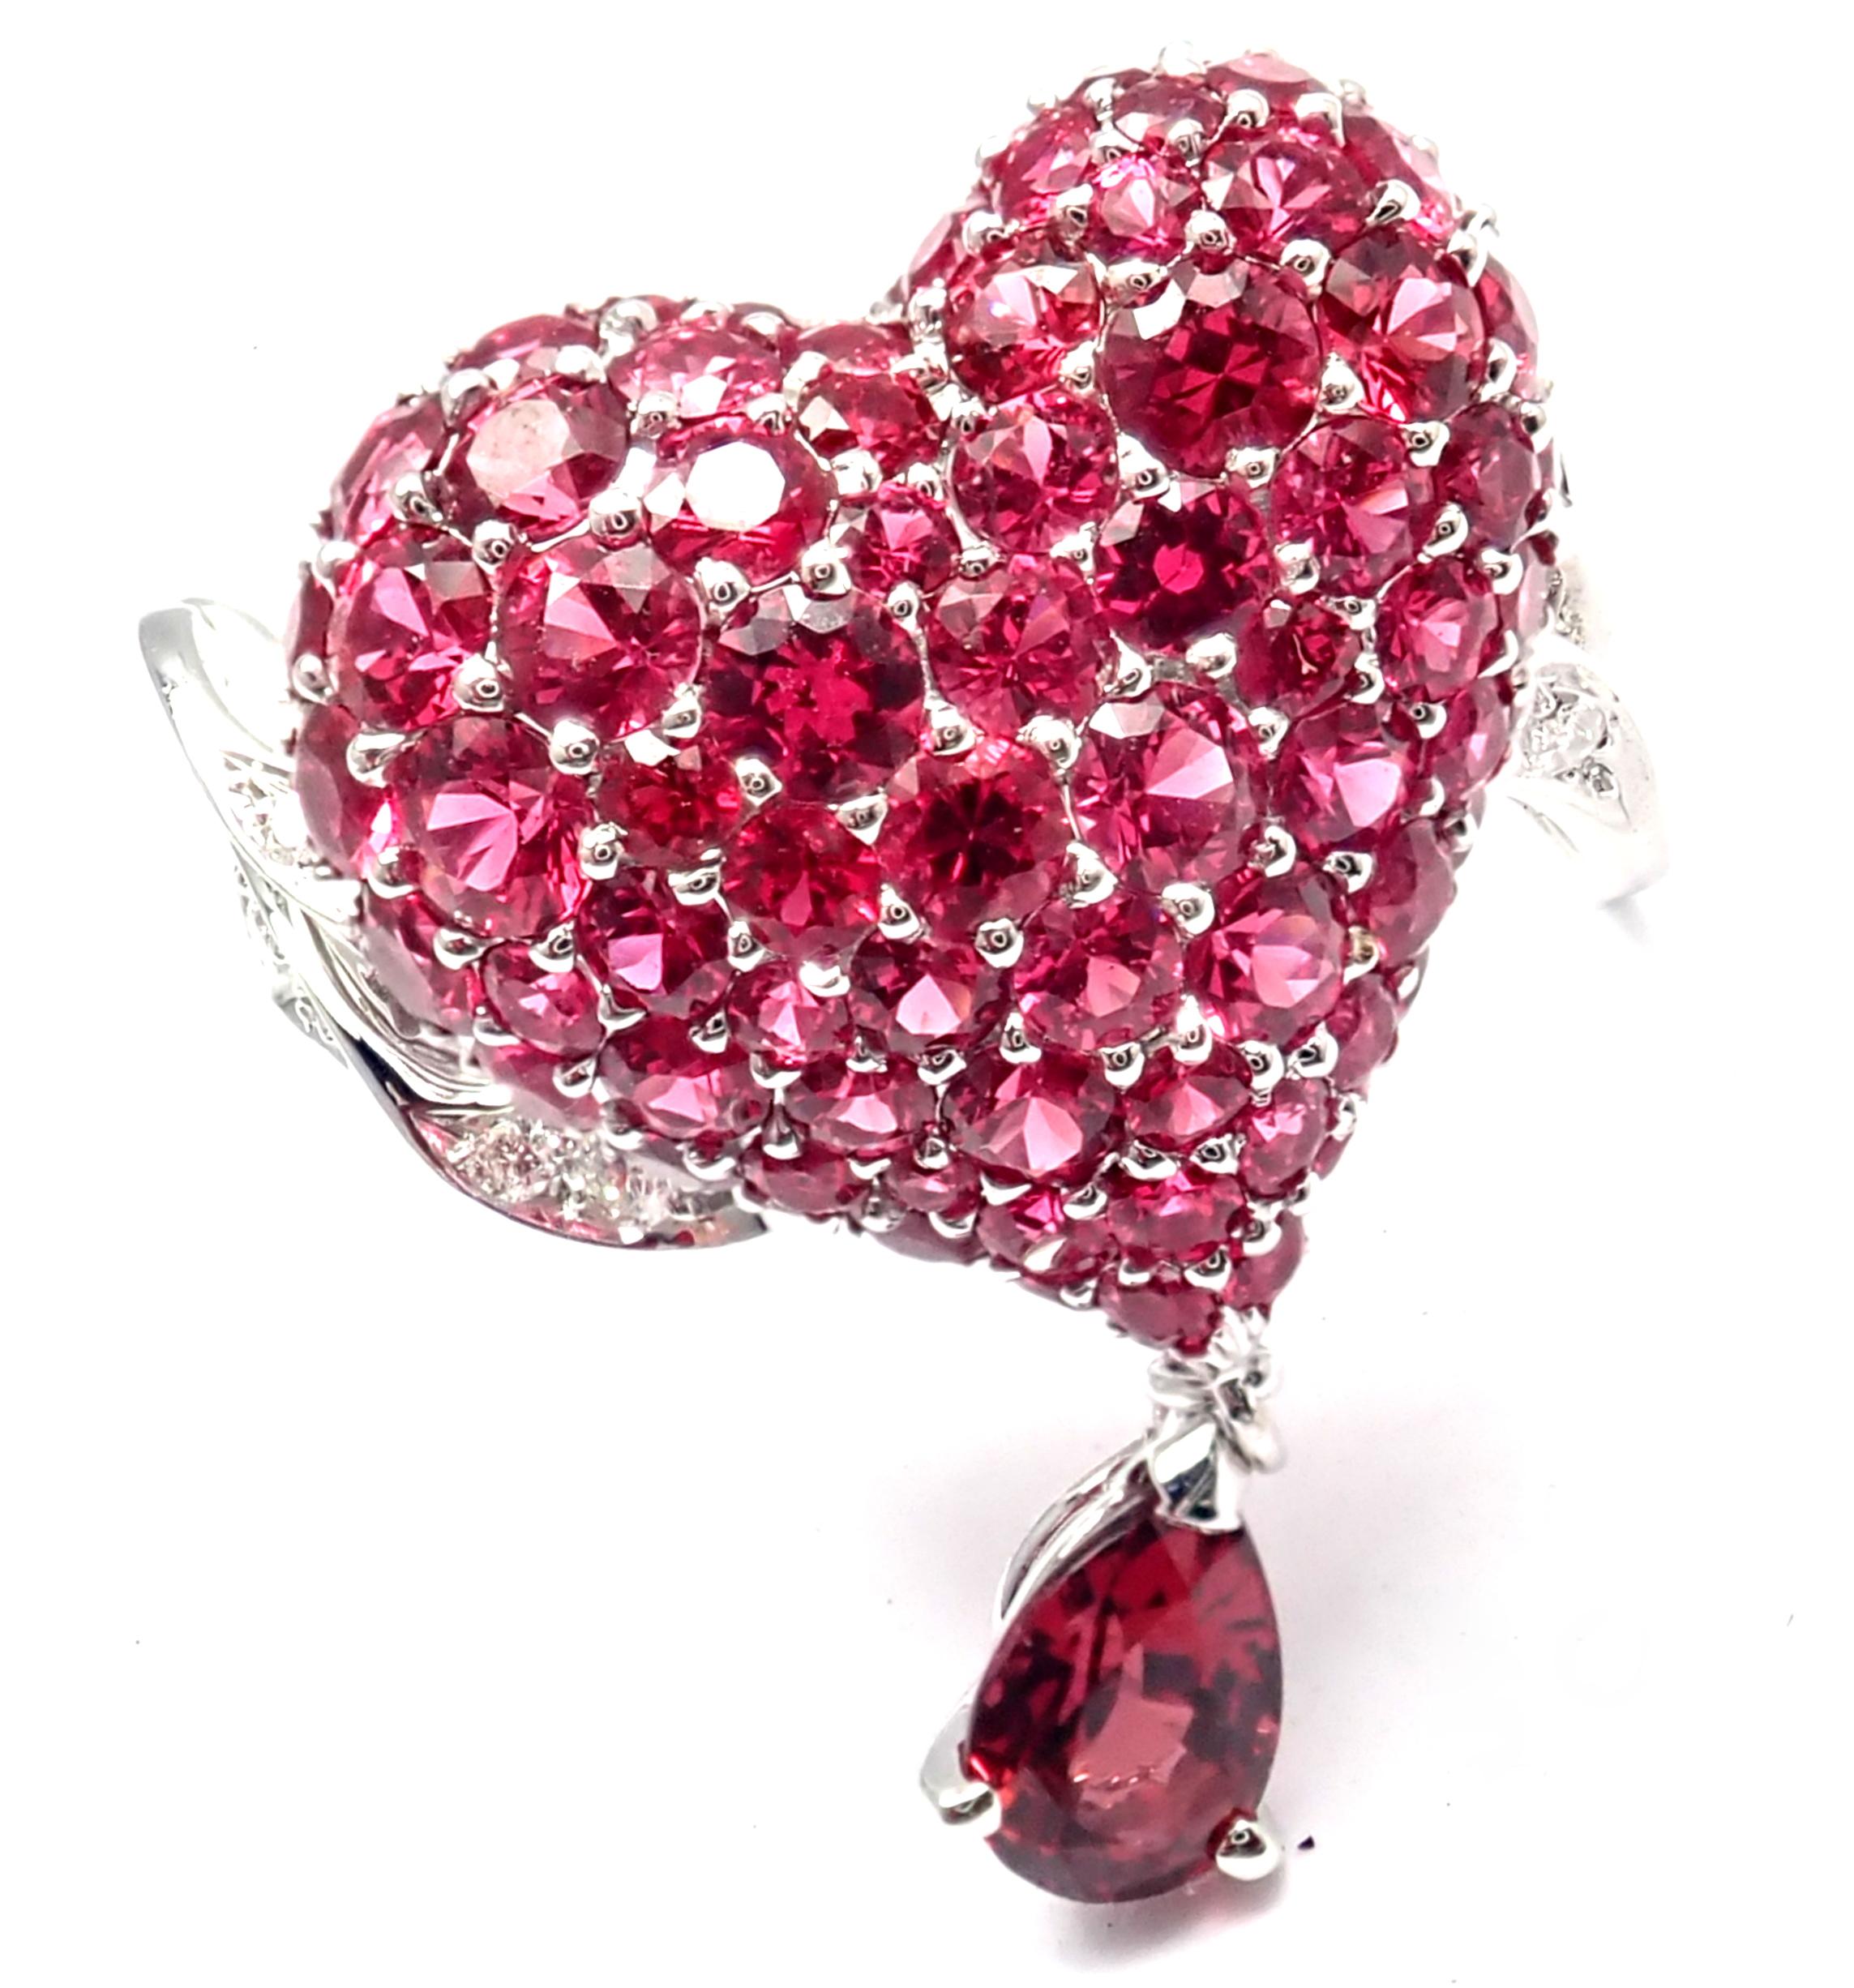 18k White Gold Cupidon Diamond Ruby Red Spinel Heart Shape Ring by Christian Dior. 
With round brilliant cut diamonds VS1 clarity, G color total weight approximately 0.90ctw
red rubies and red spinel.
Details: 
Size: EU 53, US 6.25
Weight: 6.1